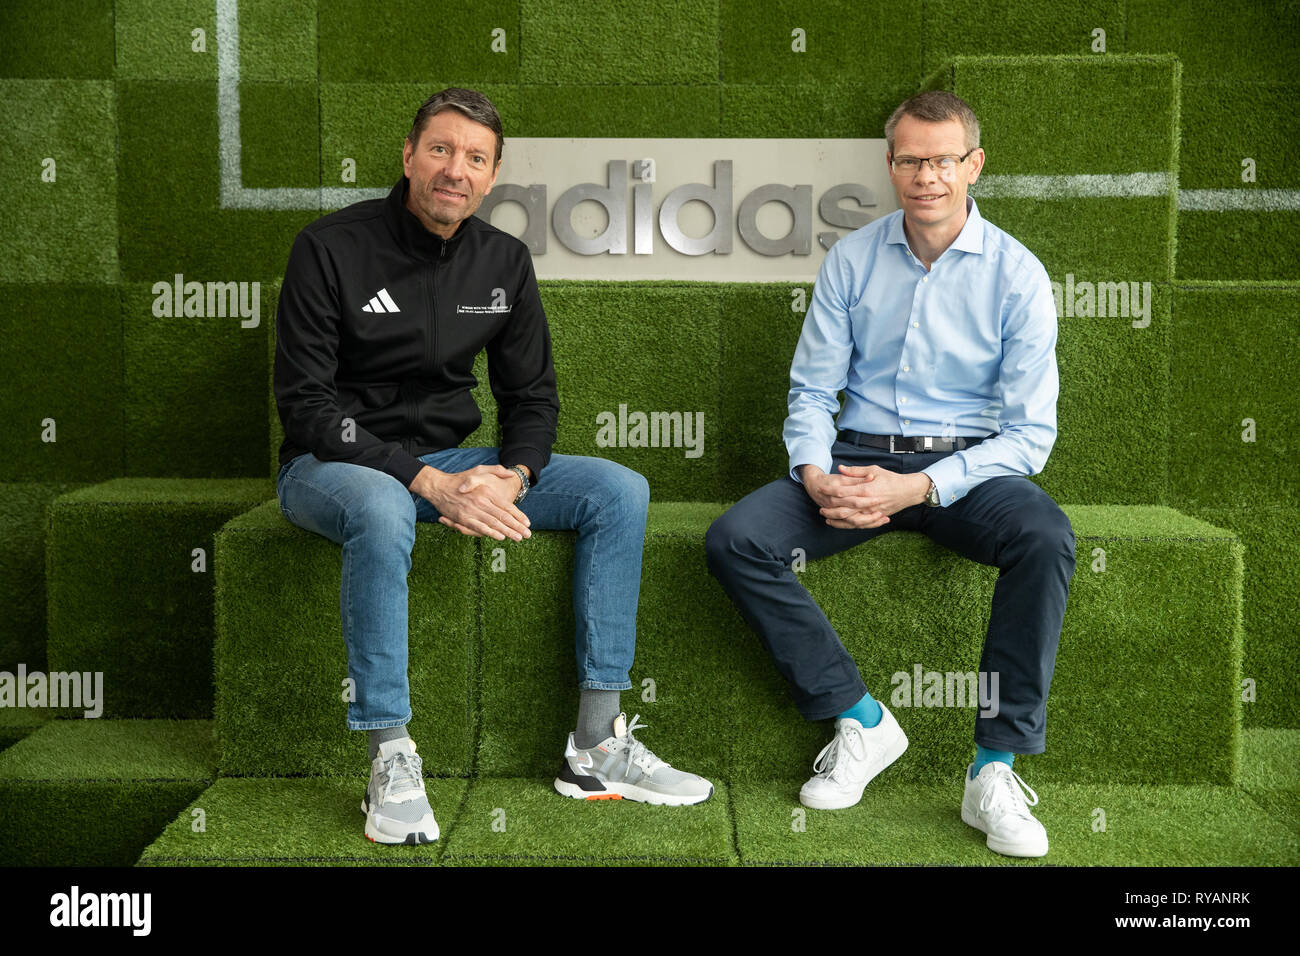 Herzogenaurach, Germany. 13th 2019. Kasper Rorsted (l), CEO of sports goods manufacturer adidas AG, and Harm Ohlmeyer, CFO of adidas AG, will sit next to the company logo before the start